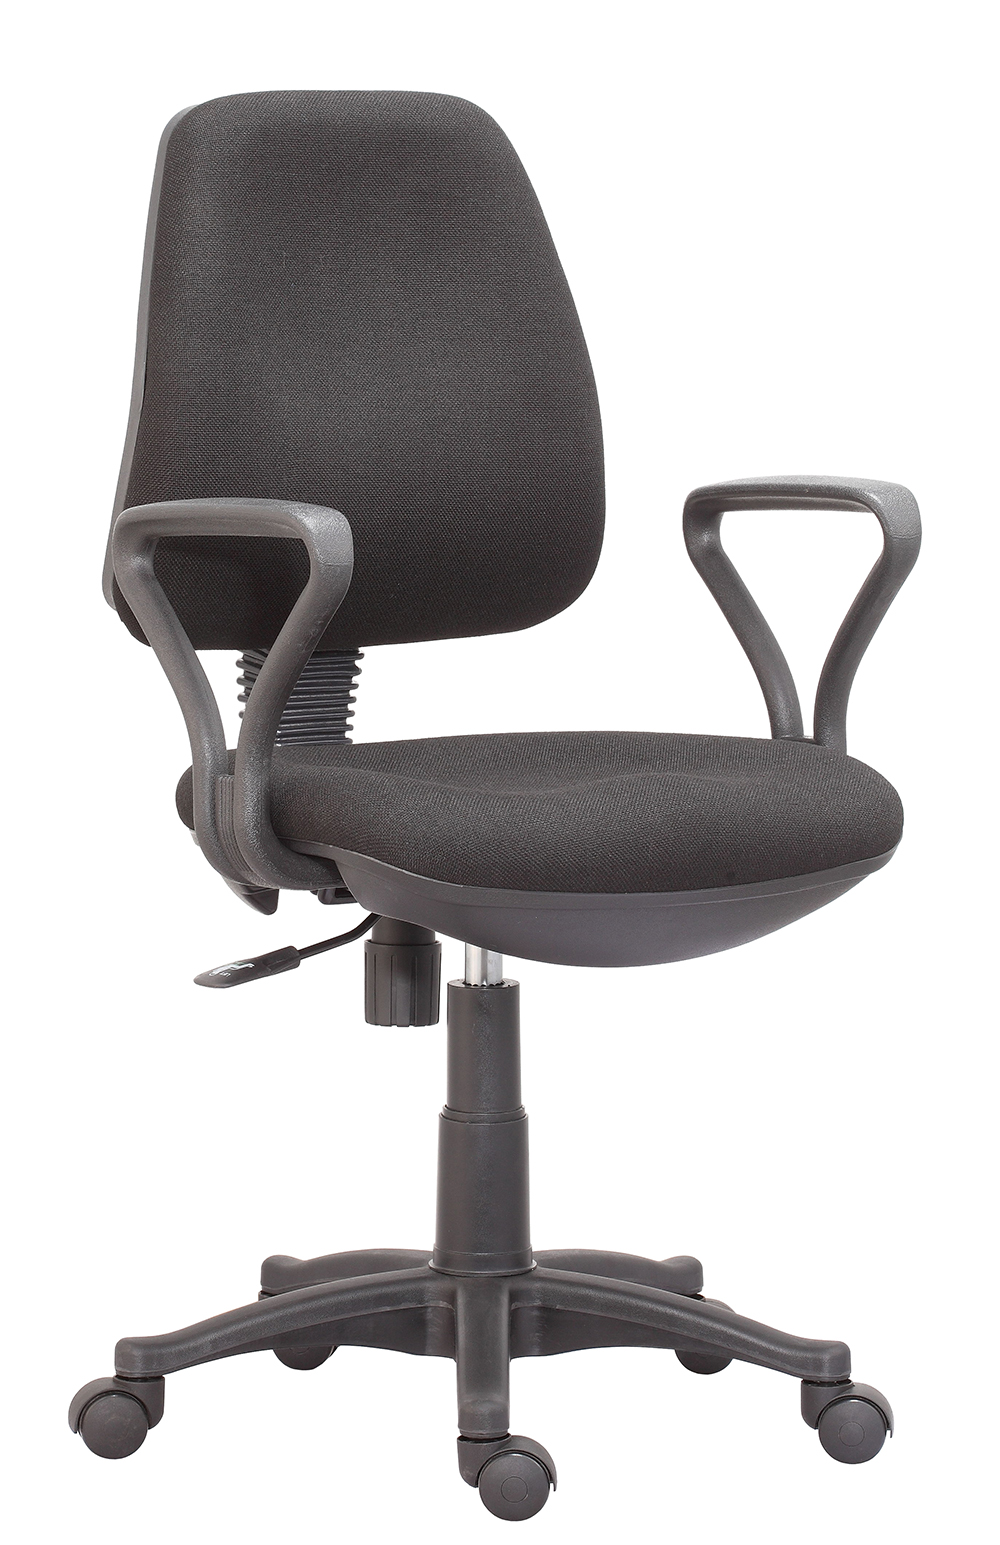 Budget Operators Chair Black with arms